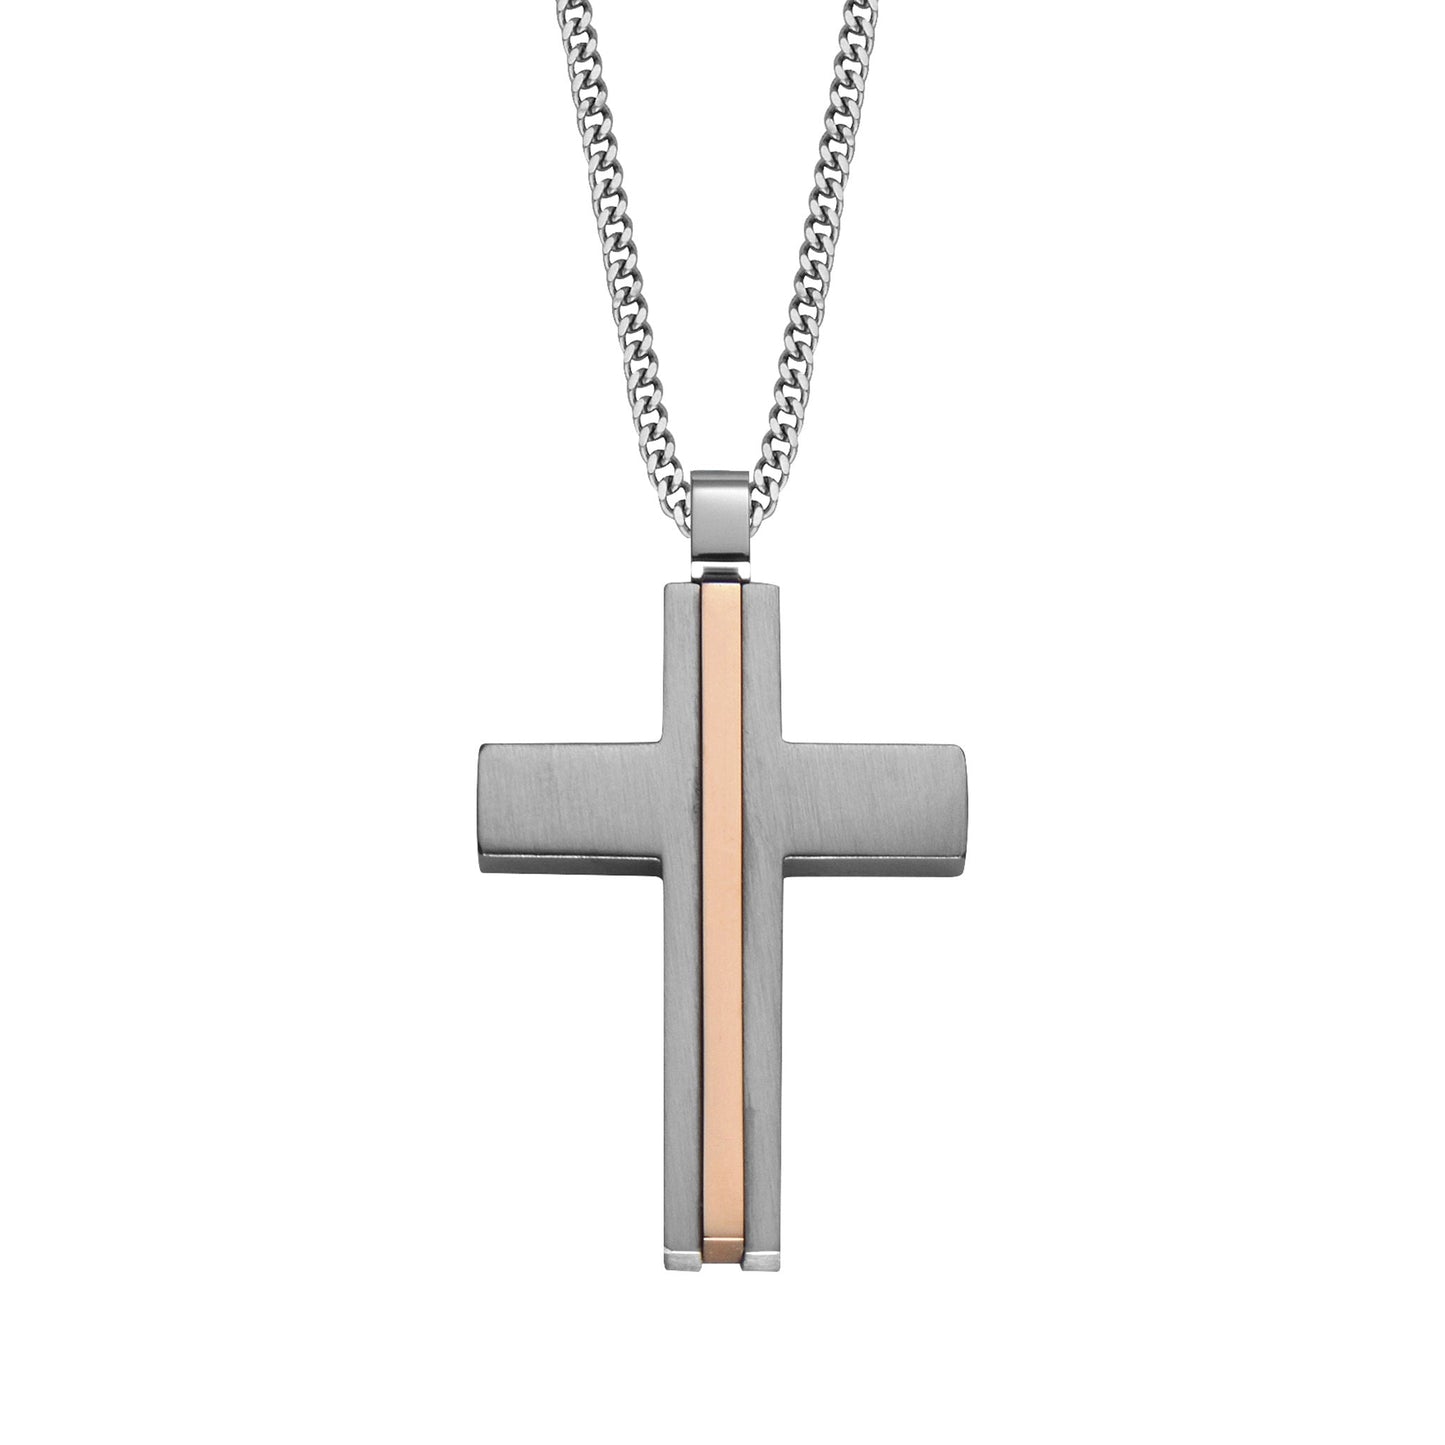 A stainless steel cross necklace with stripe accent displayed on a neutral white background.